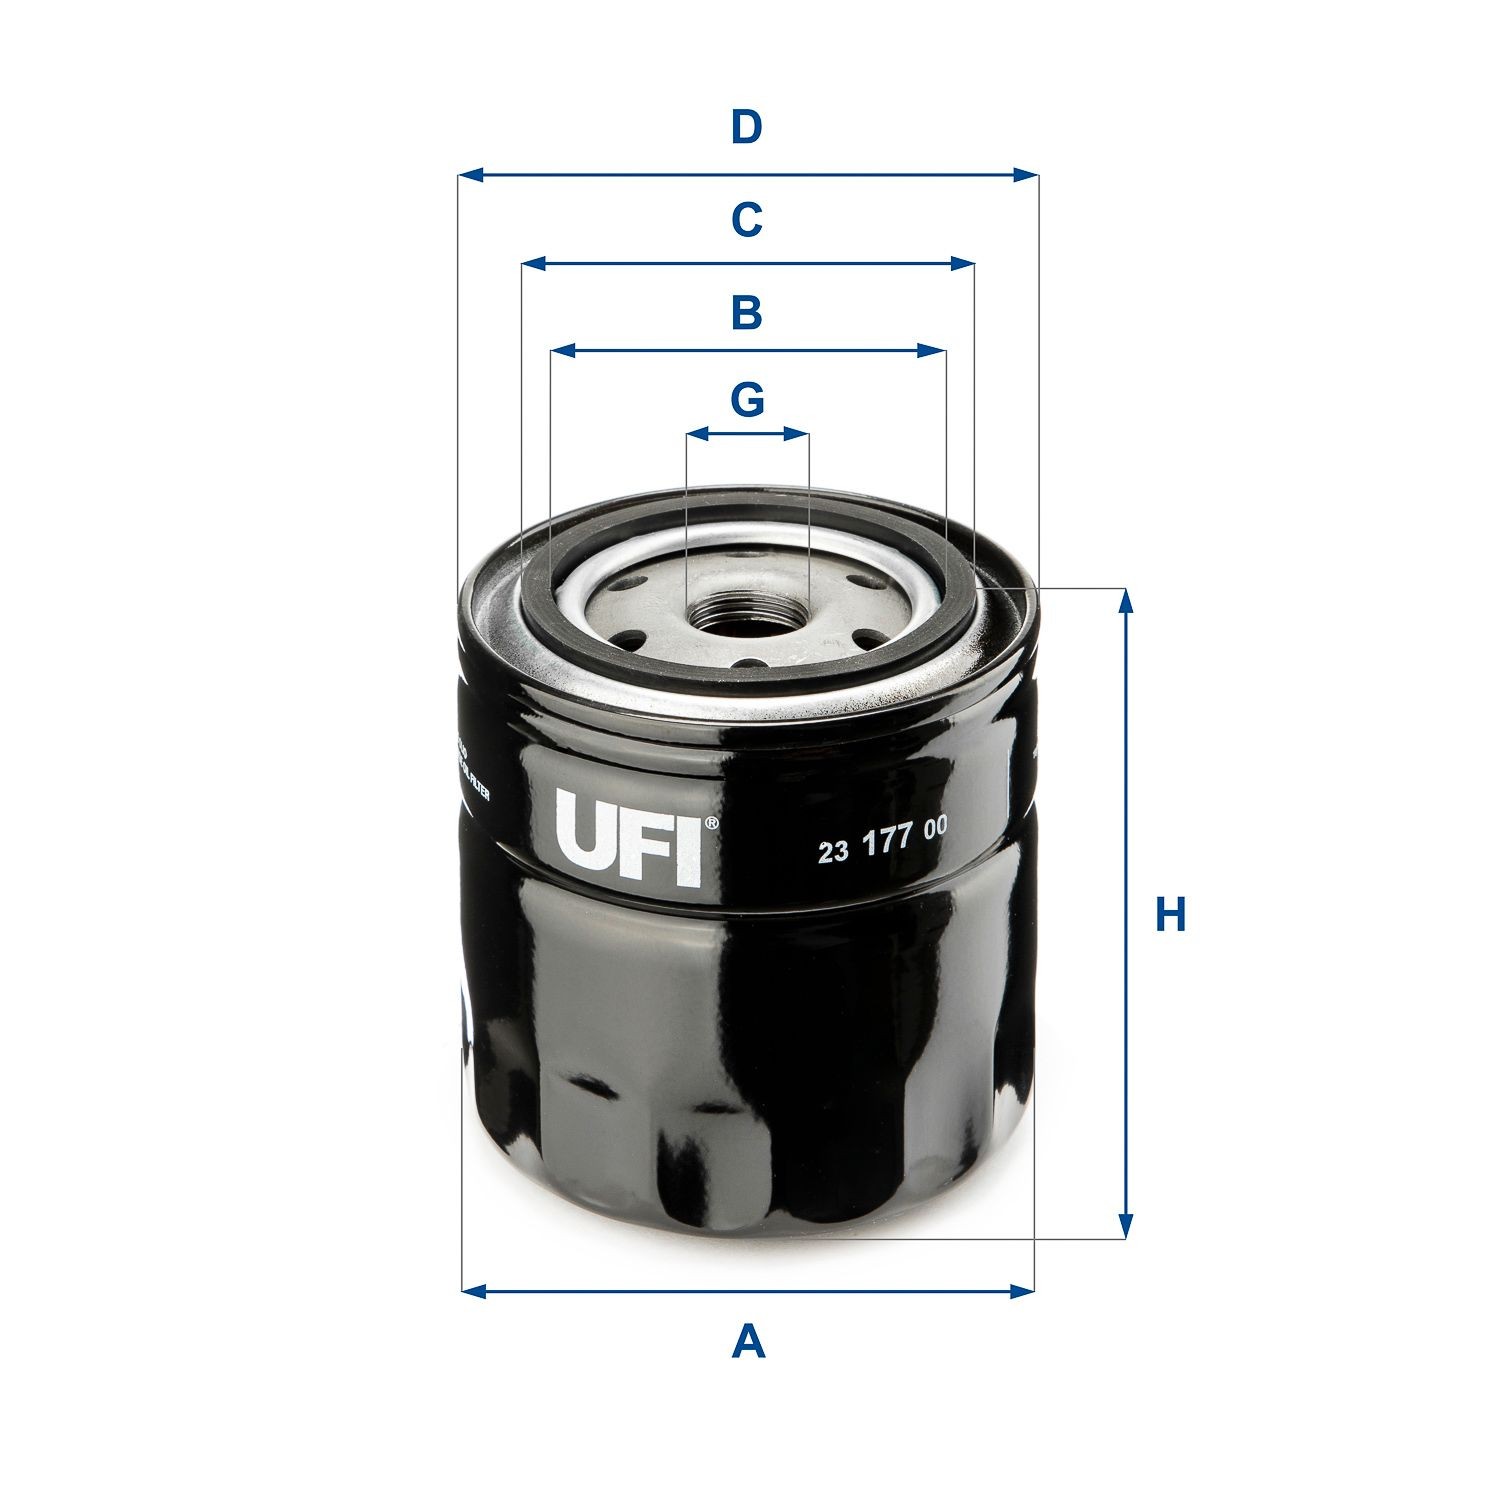 23.177.00 UFI Oil filters JEEP M 20 X 1,5, with one anti-return valve, Spin-on Filter